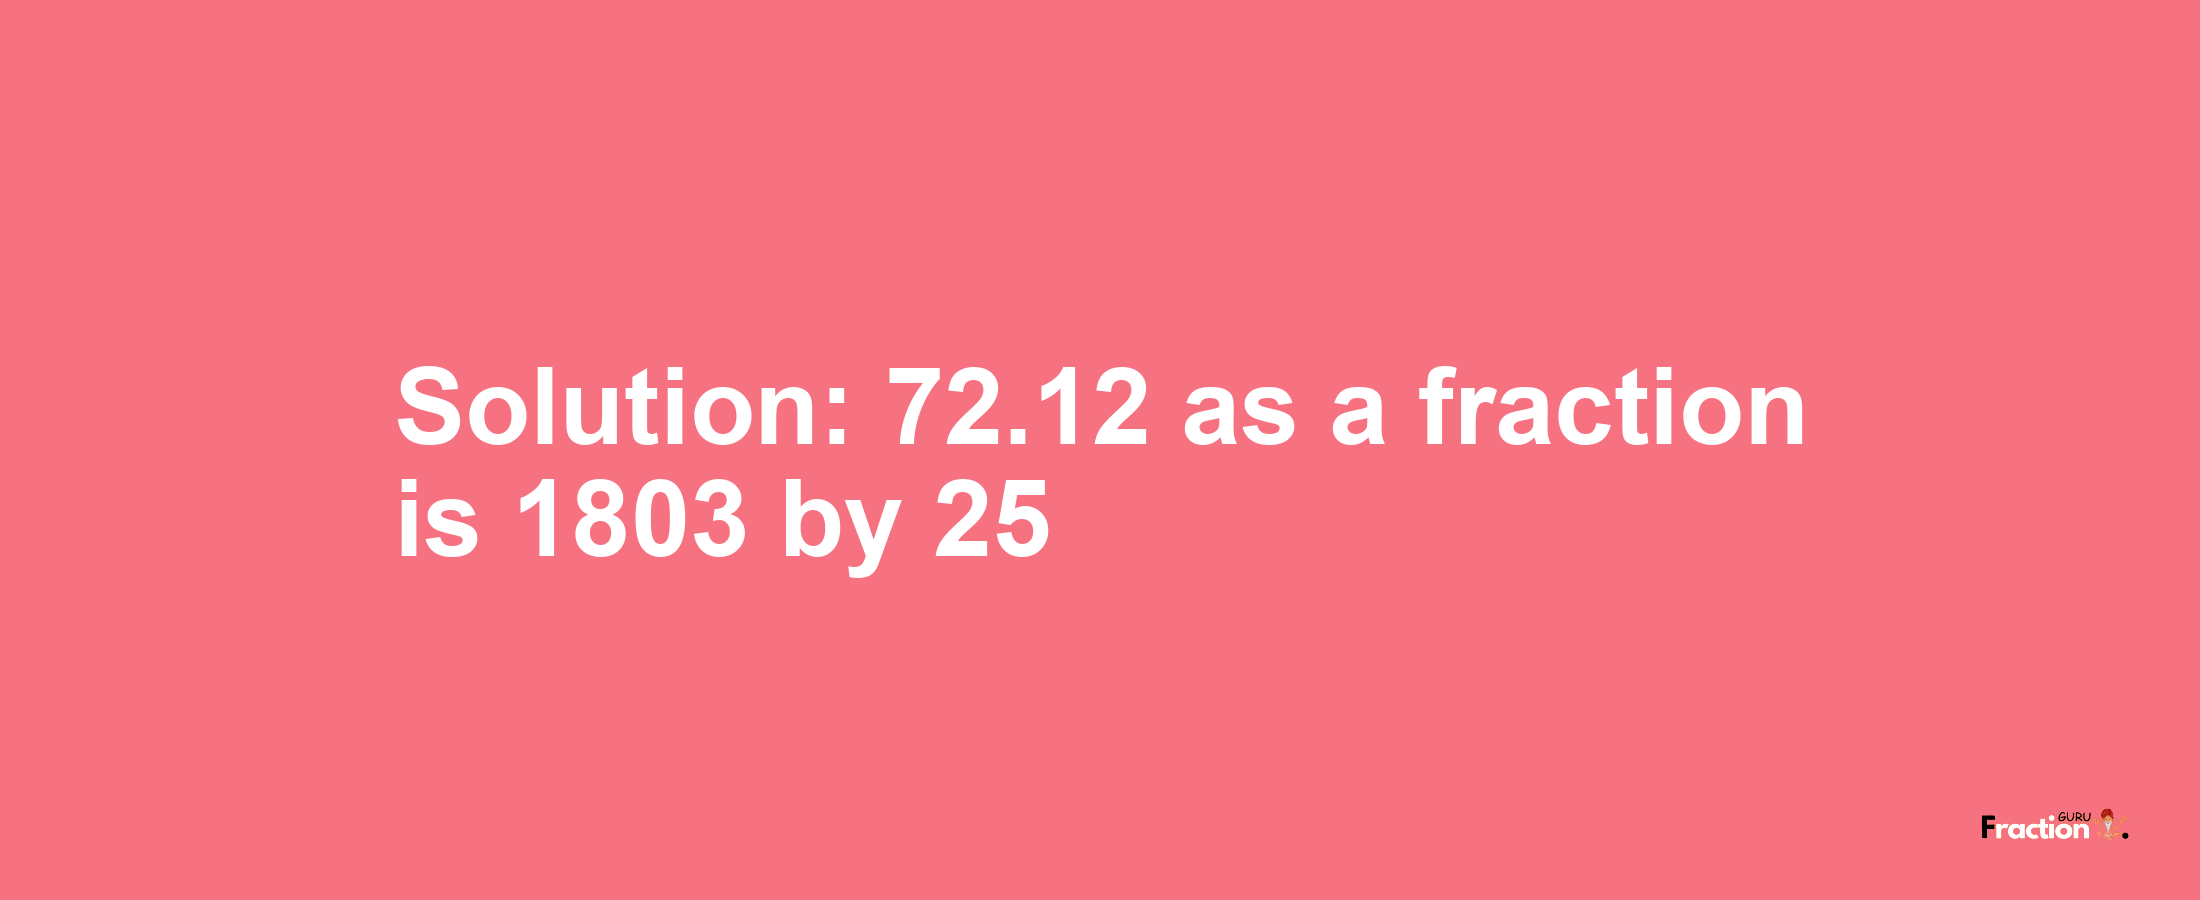 Solution:72.12 as a fraction is 1803/25